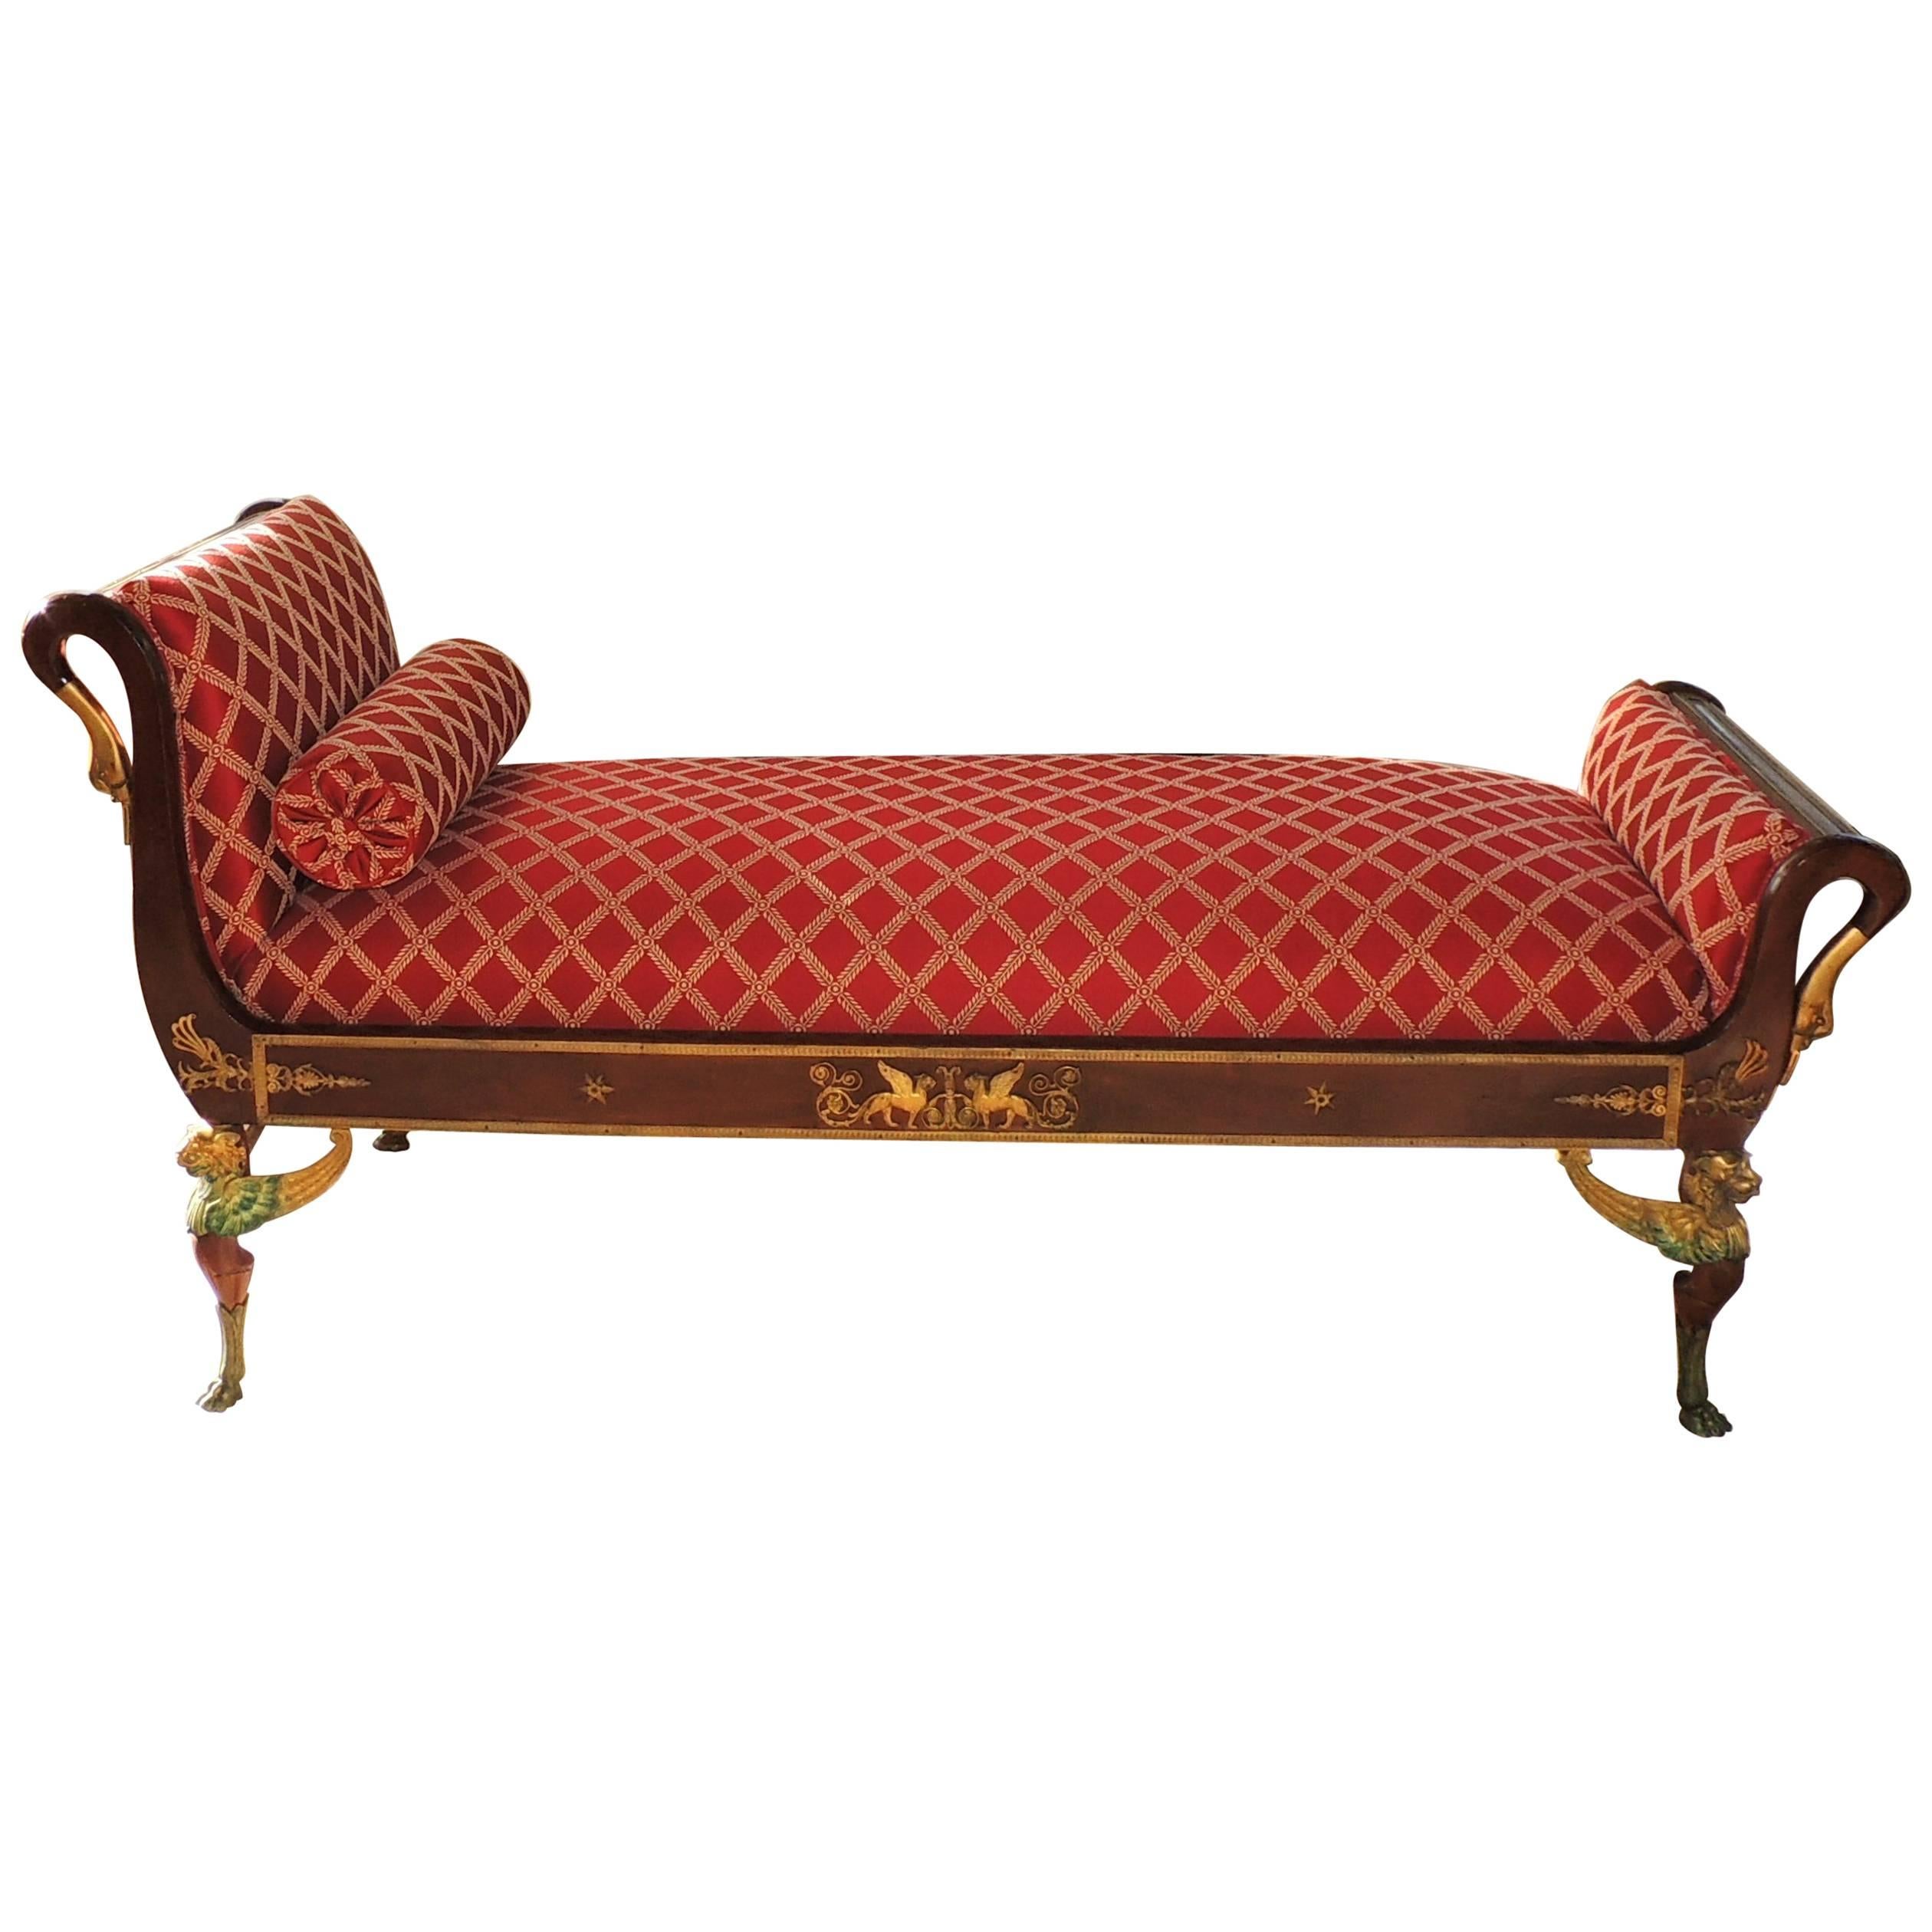 Wonderful French Empire Ormulo Bronze Mounted Chaise Lounge Neoclassic Recamier